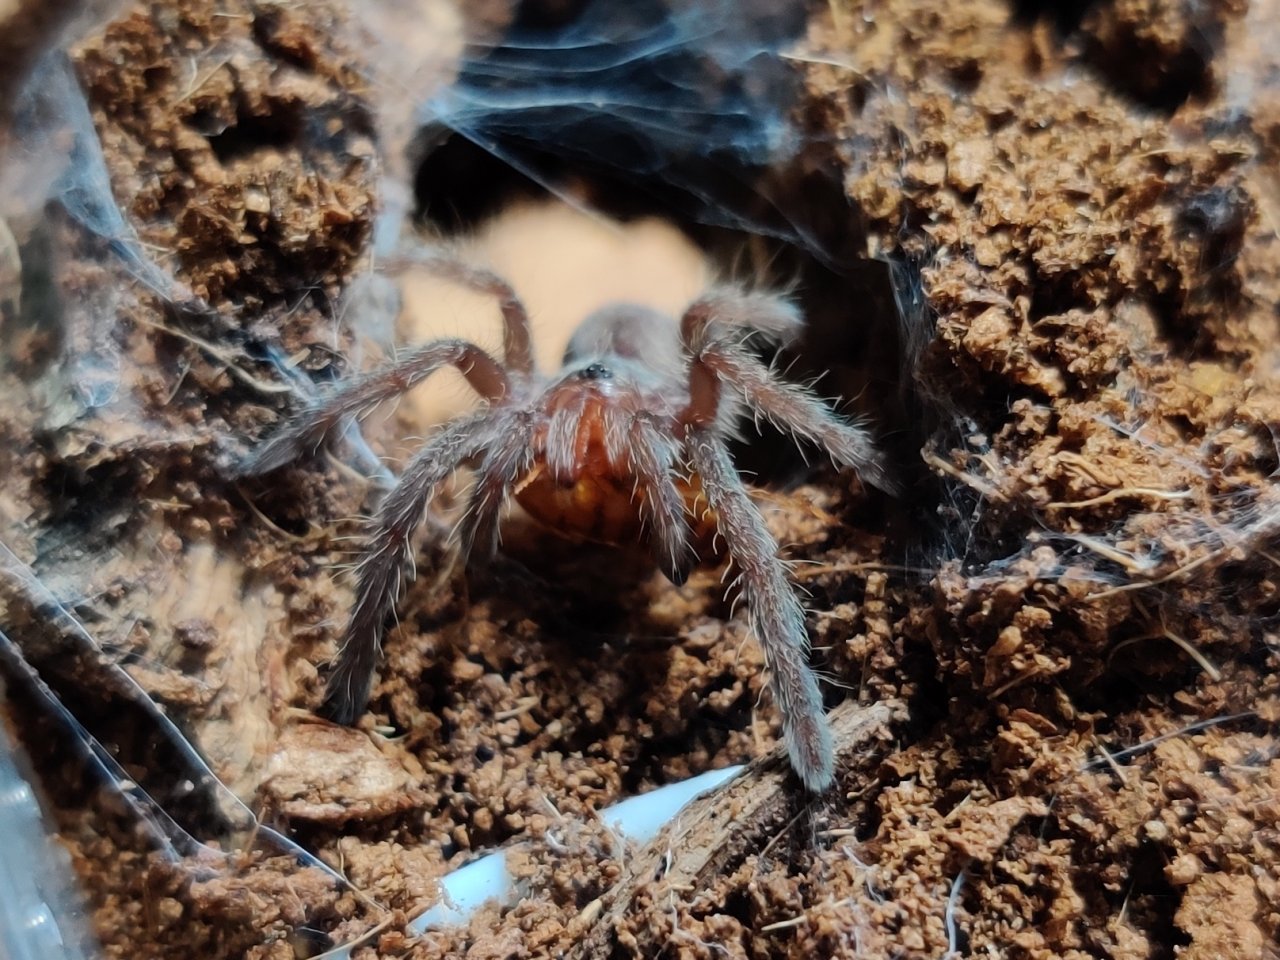 C. marshalli munching one of his first roaches after molt.